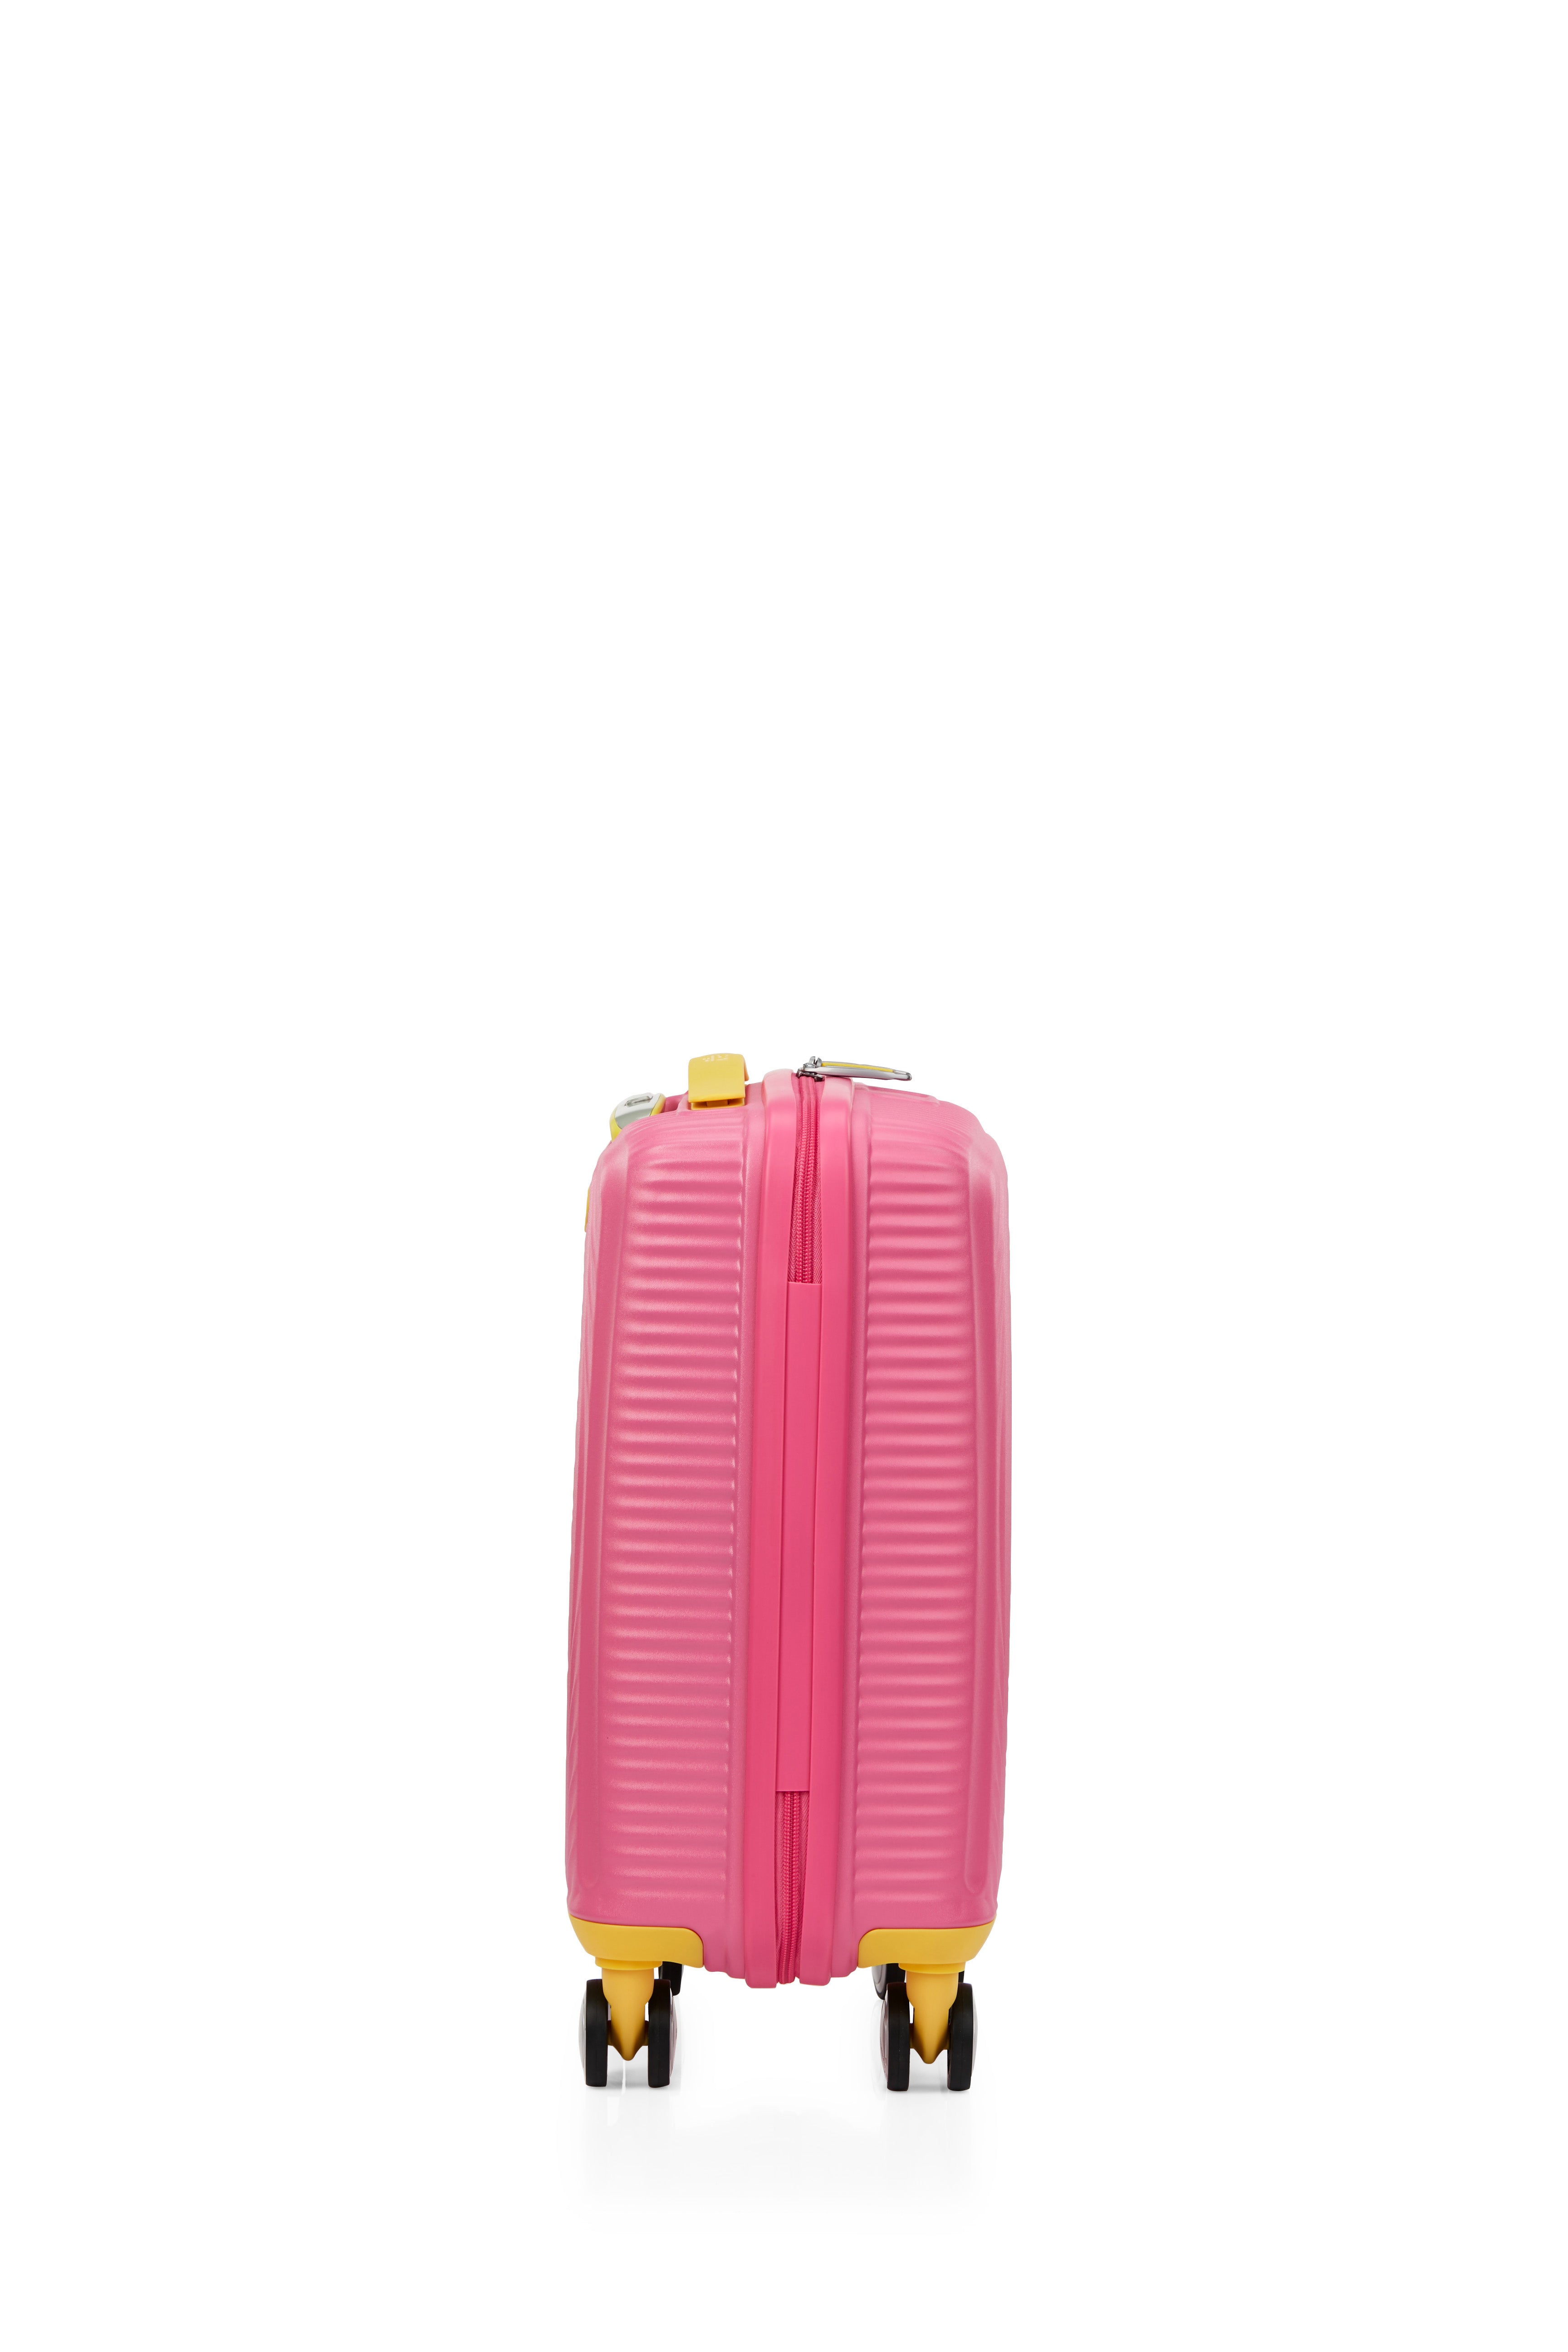 American Tourister - Little Curio 47cm Spinner - Pink/Yellow-5